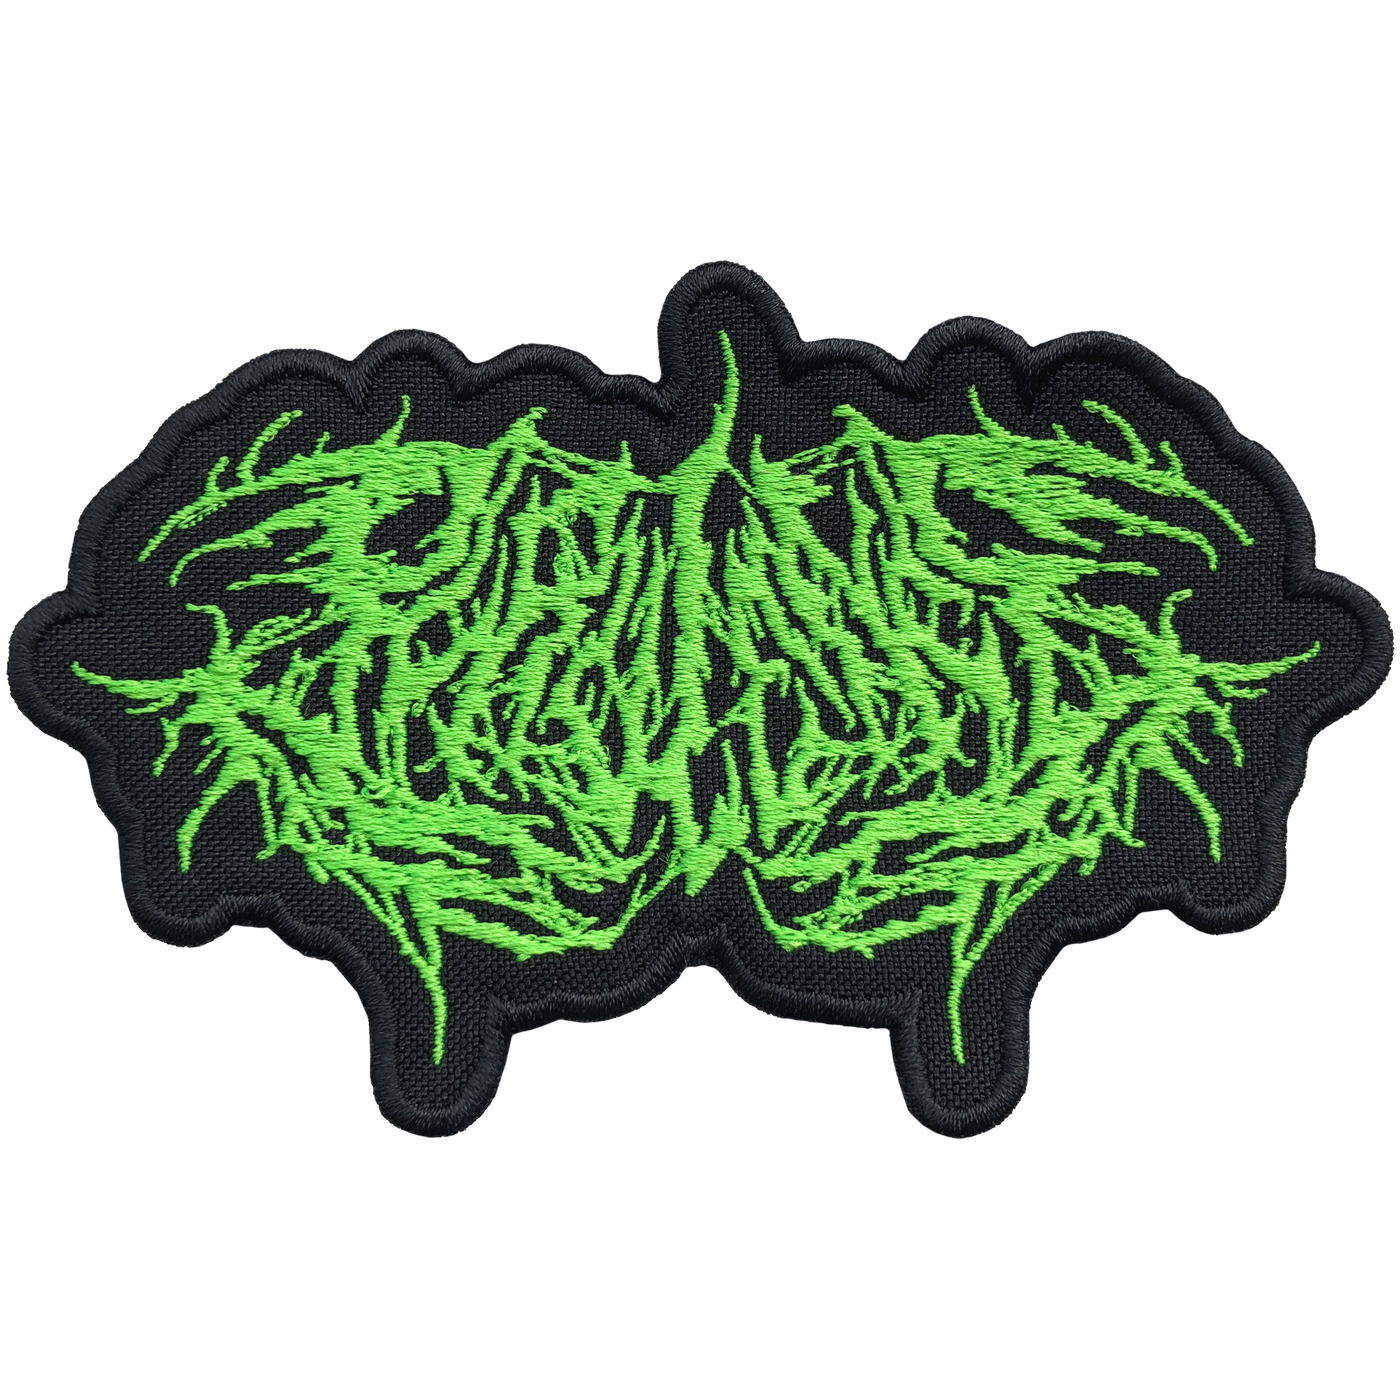 Purulence Patches